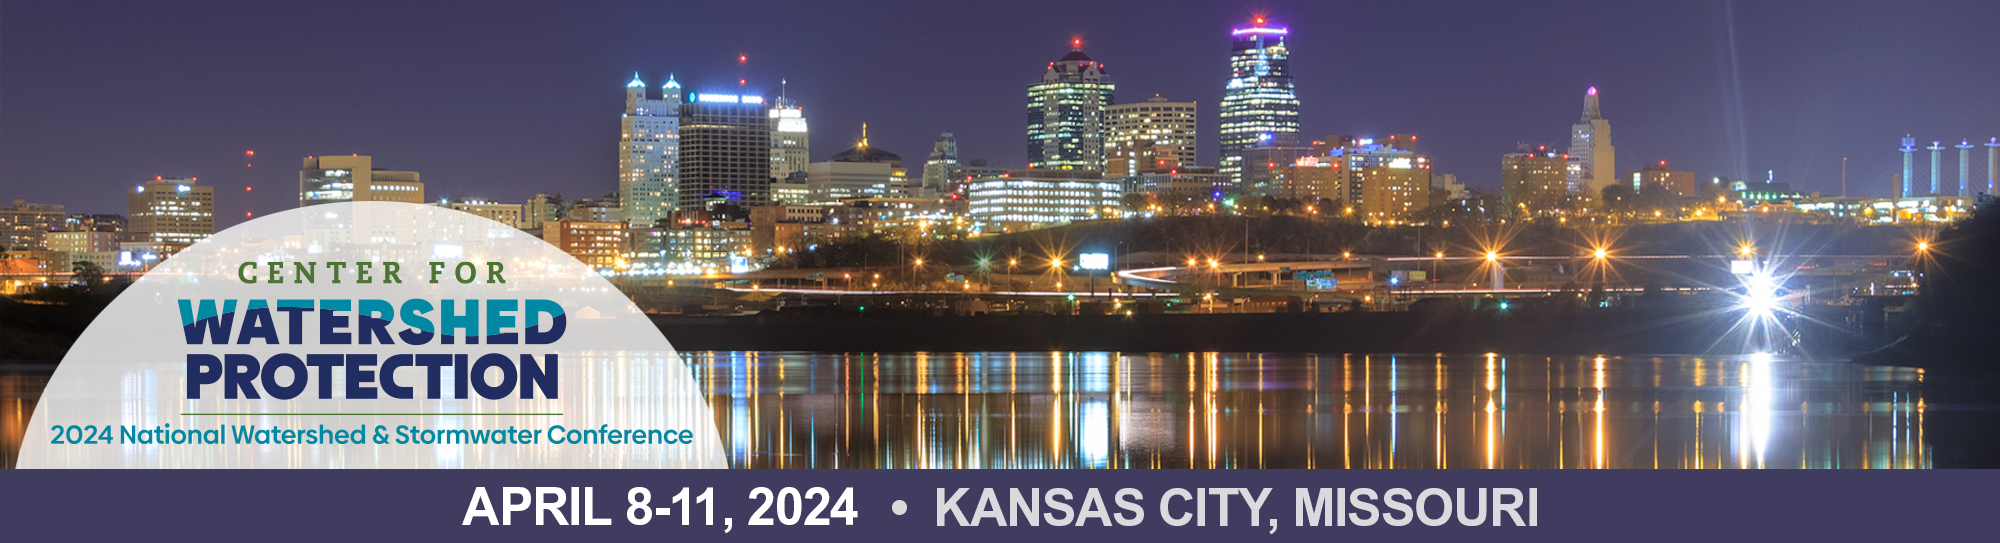 2024 National Conference Kansas City Center for Watershed Protection